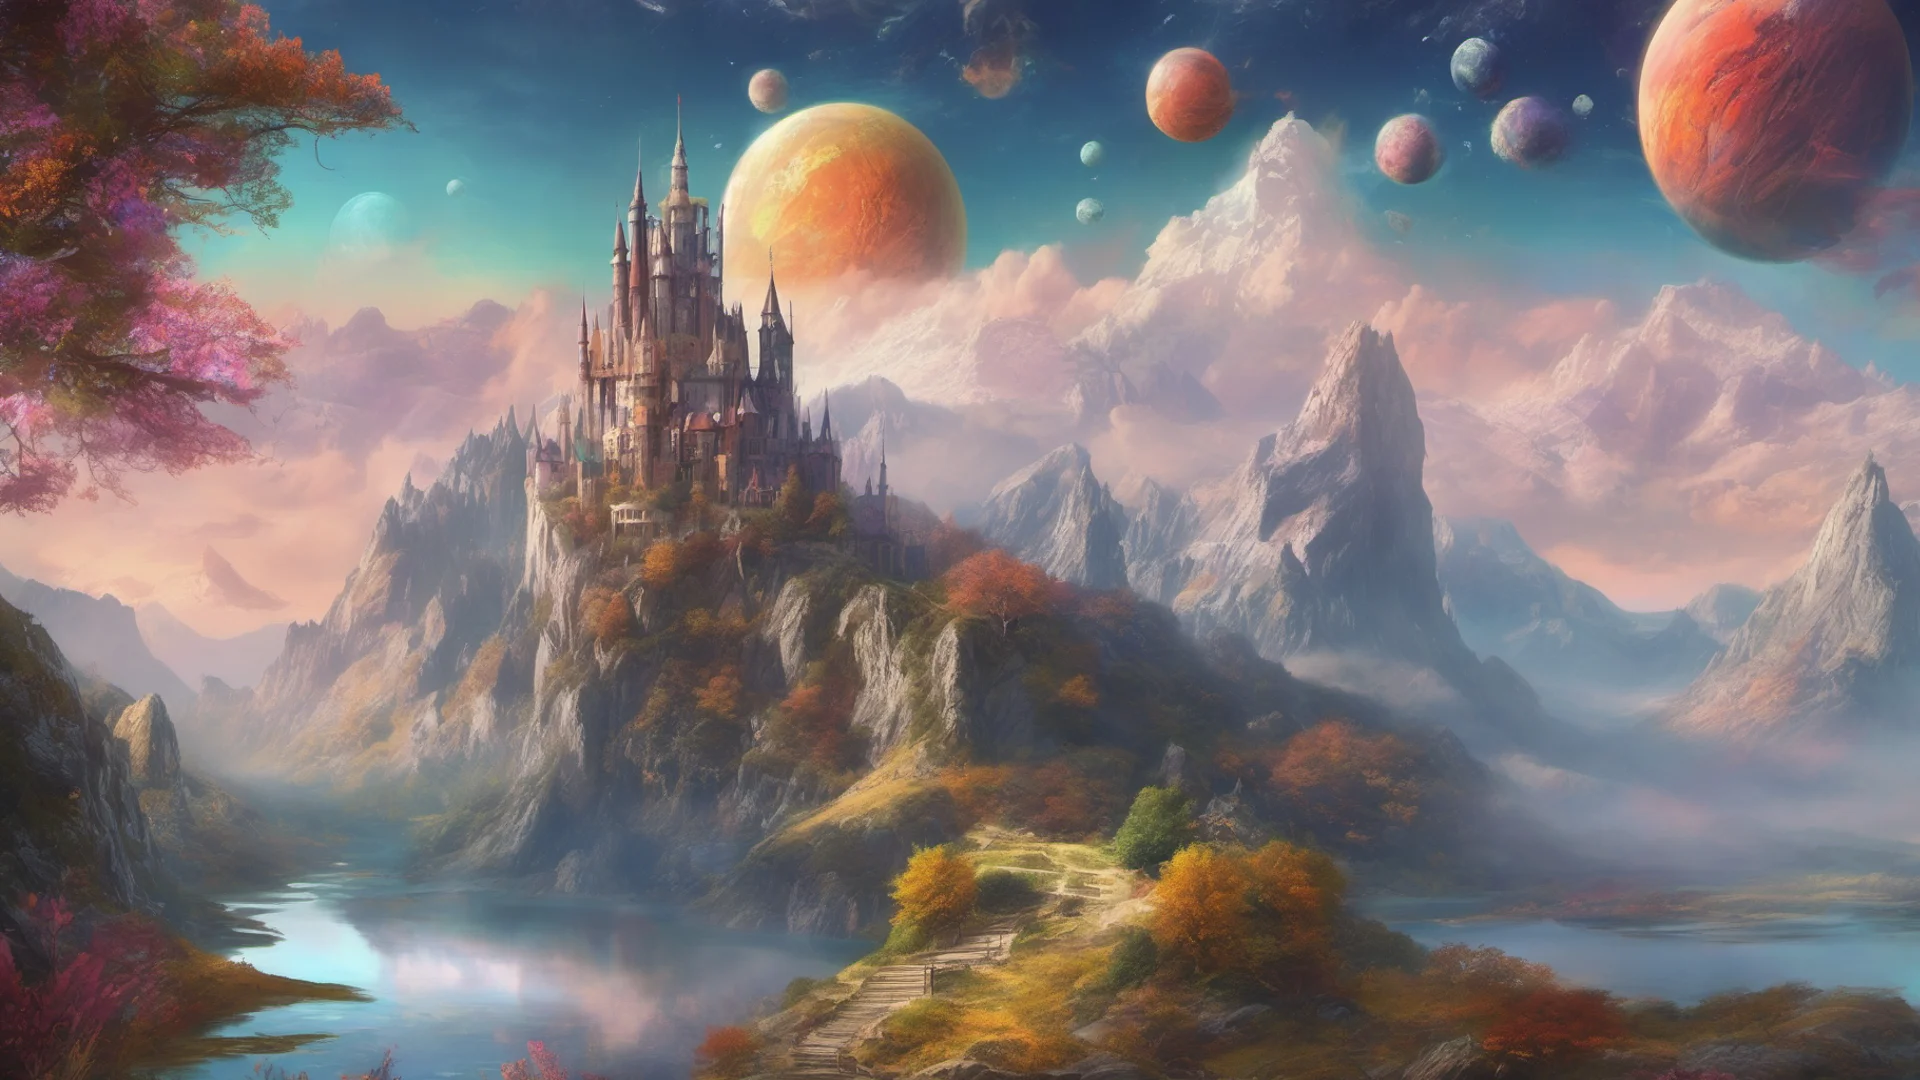 epic fantasy environment castle on tall mountain lakes sky with many colorful planets   wide